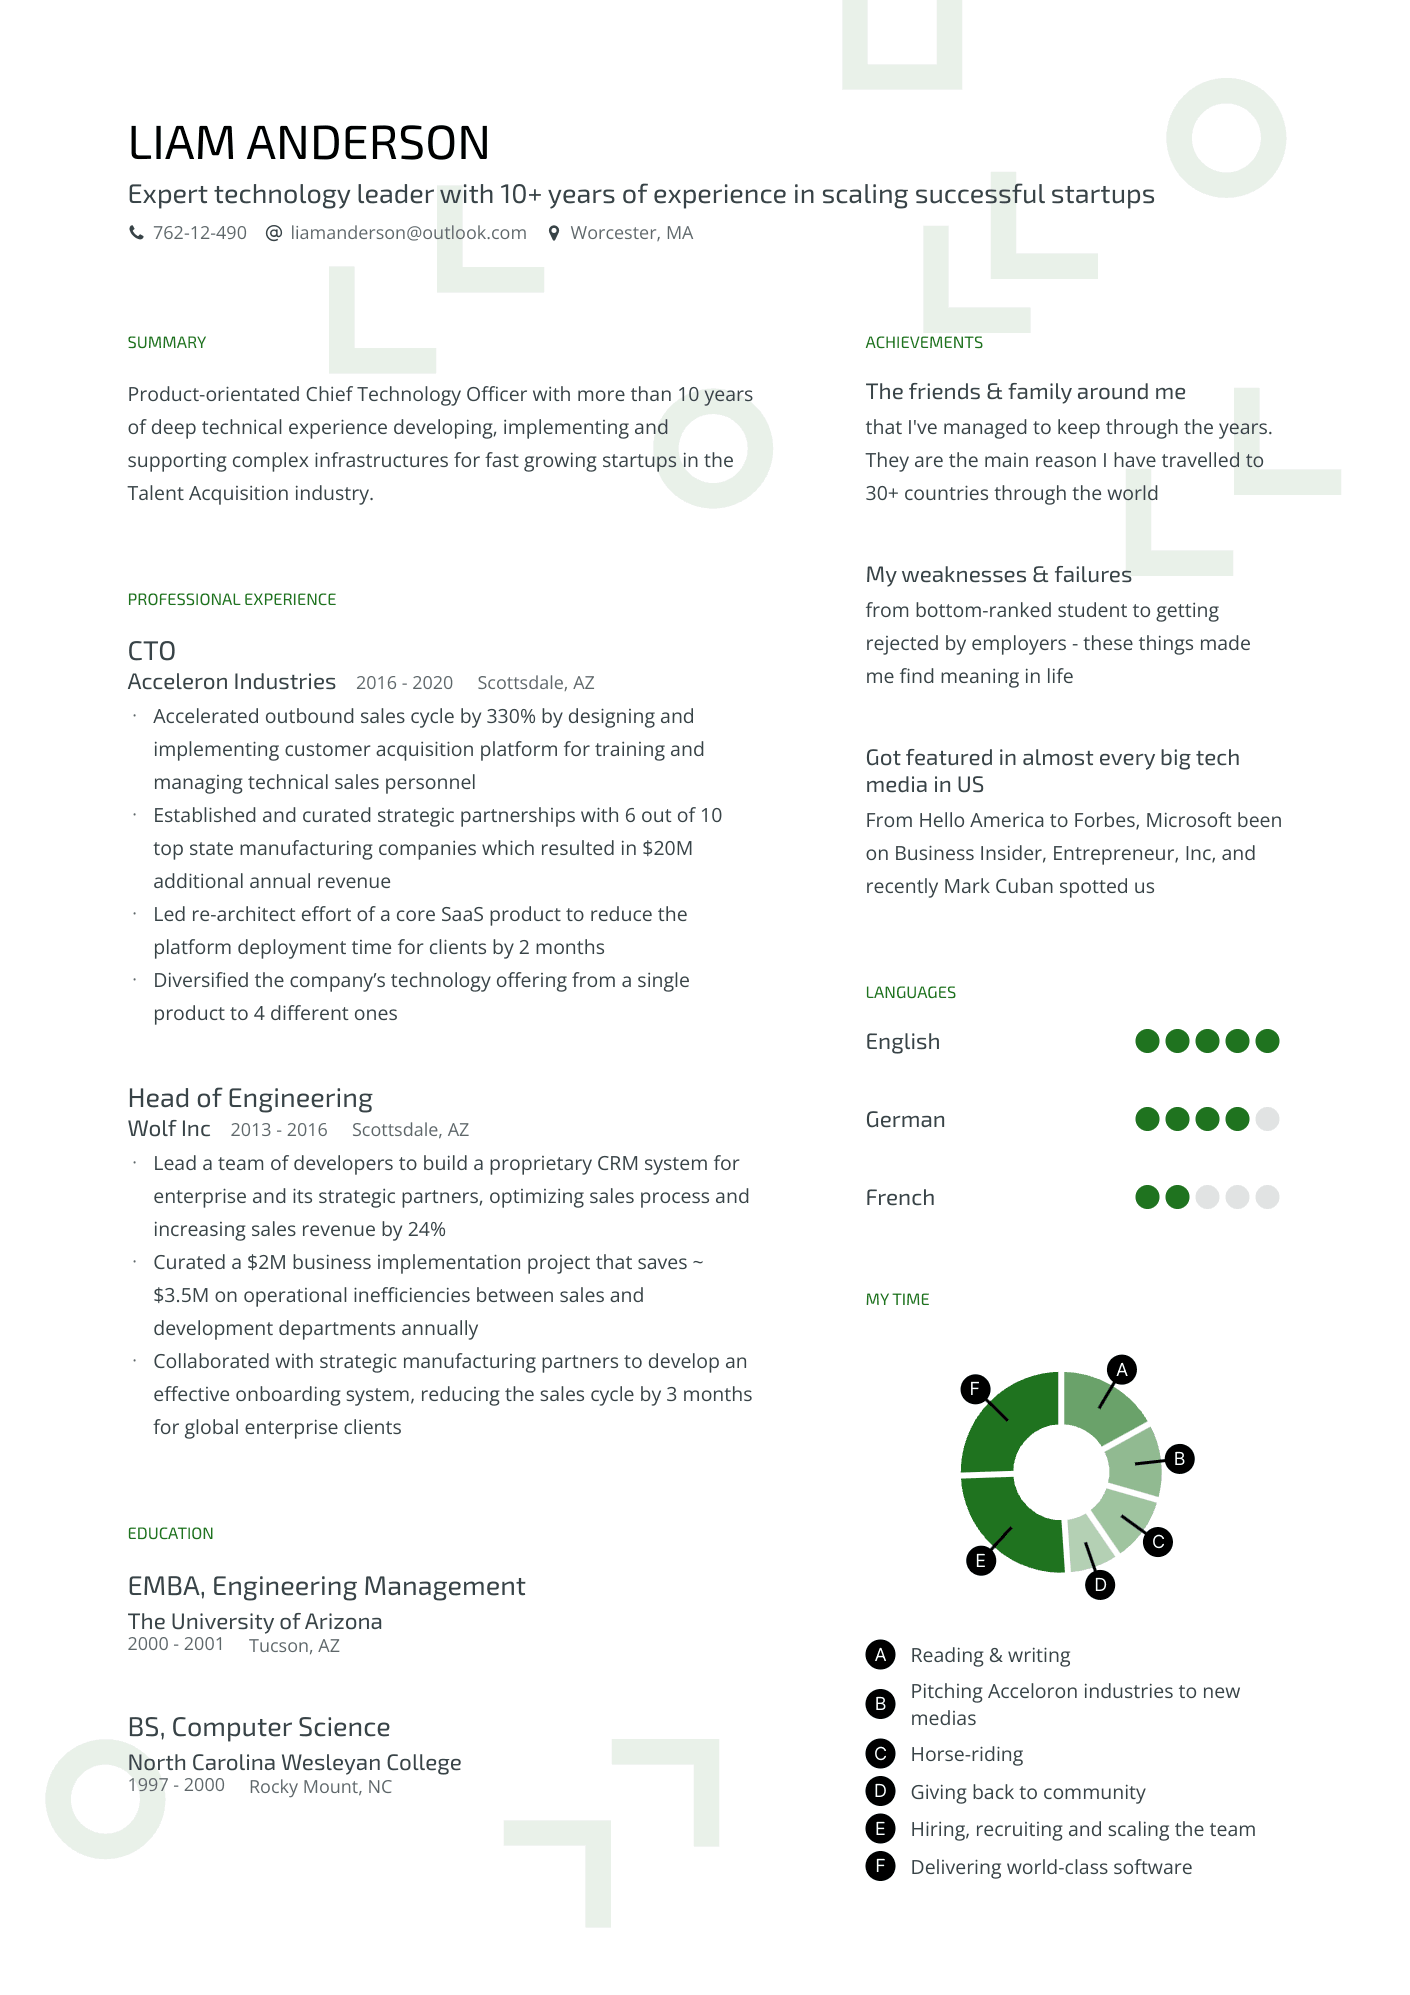 Expert technology leader with 10+ years of experience in scaling successful startups CV example